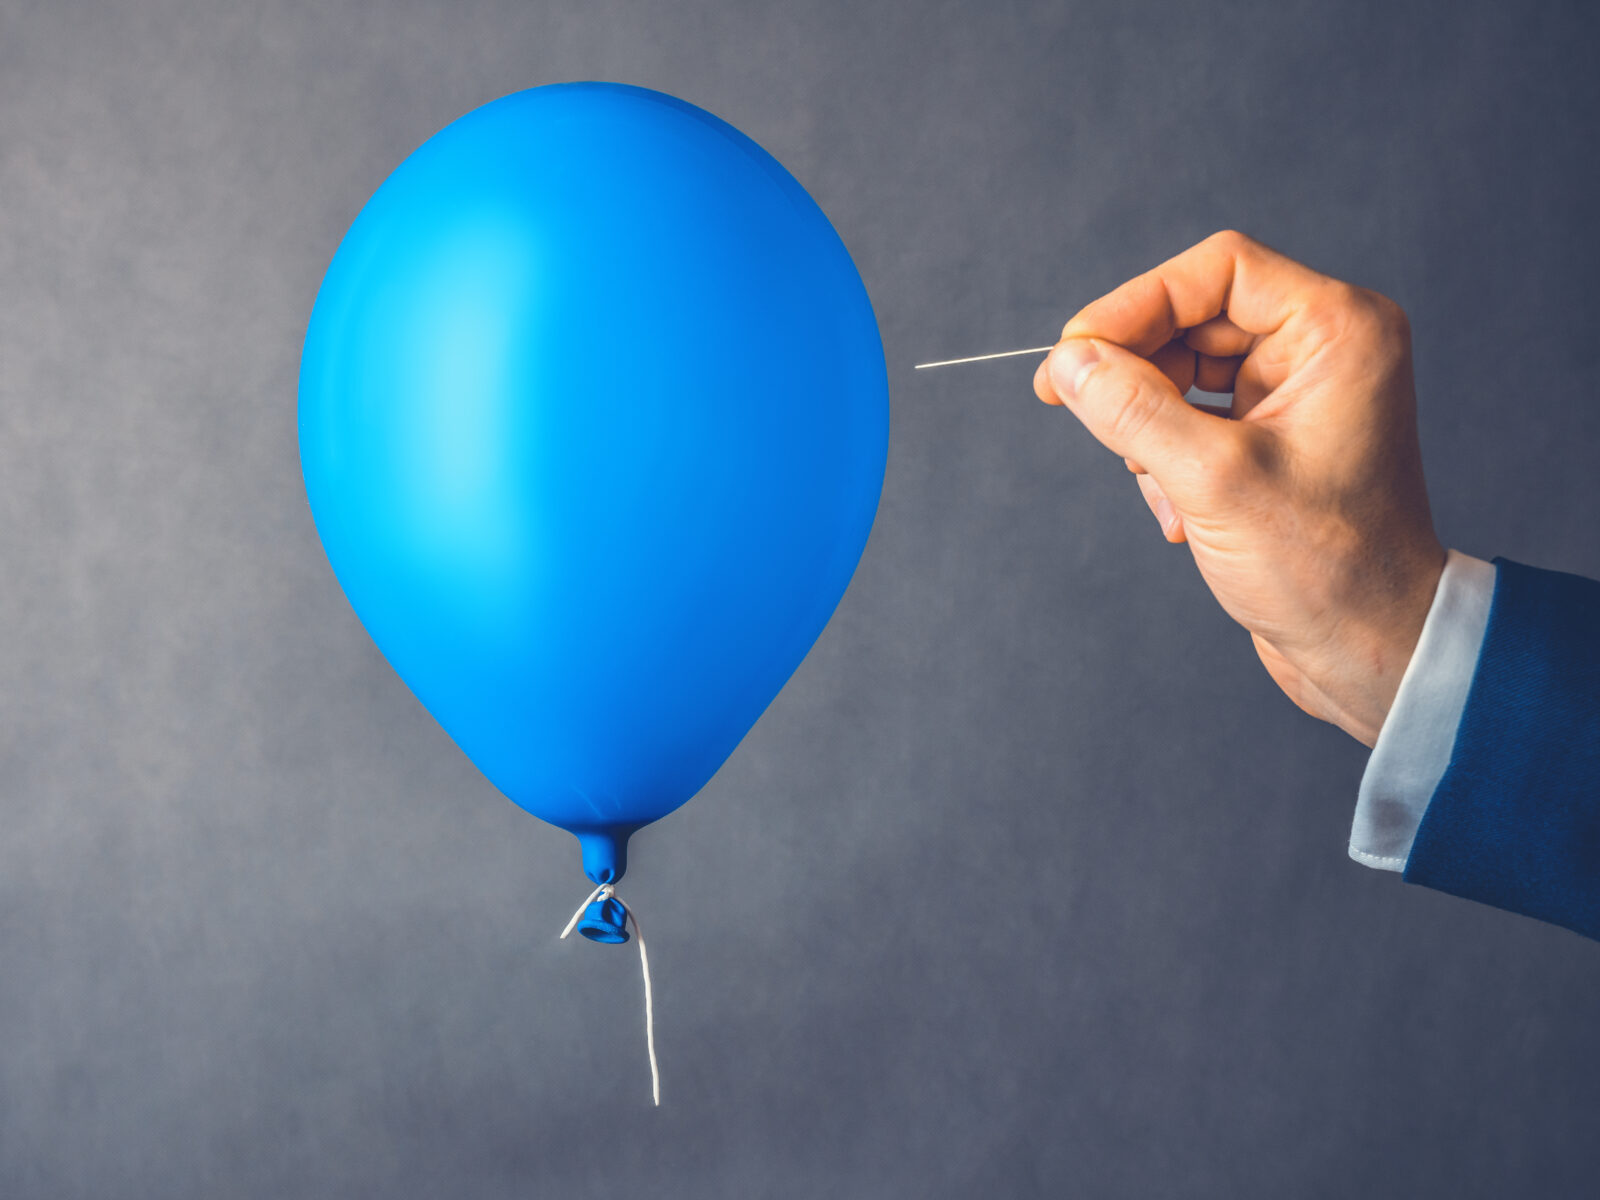 Blue balloon. Man hold needle directed to air balloon. Concept of risk. Copy space.